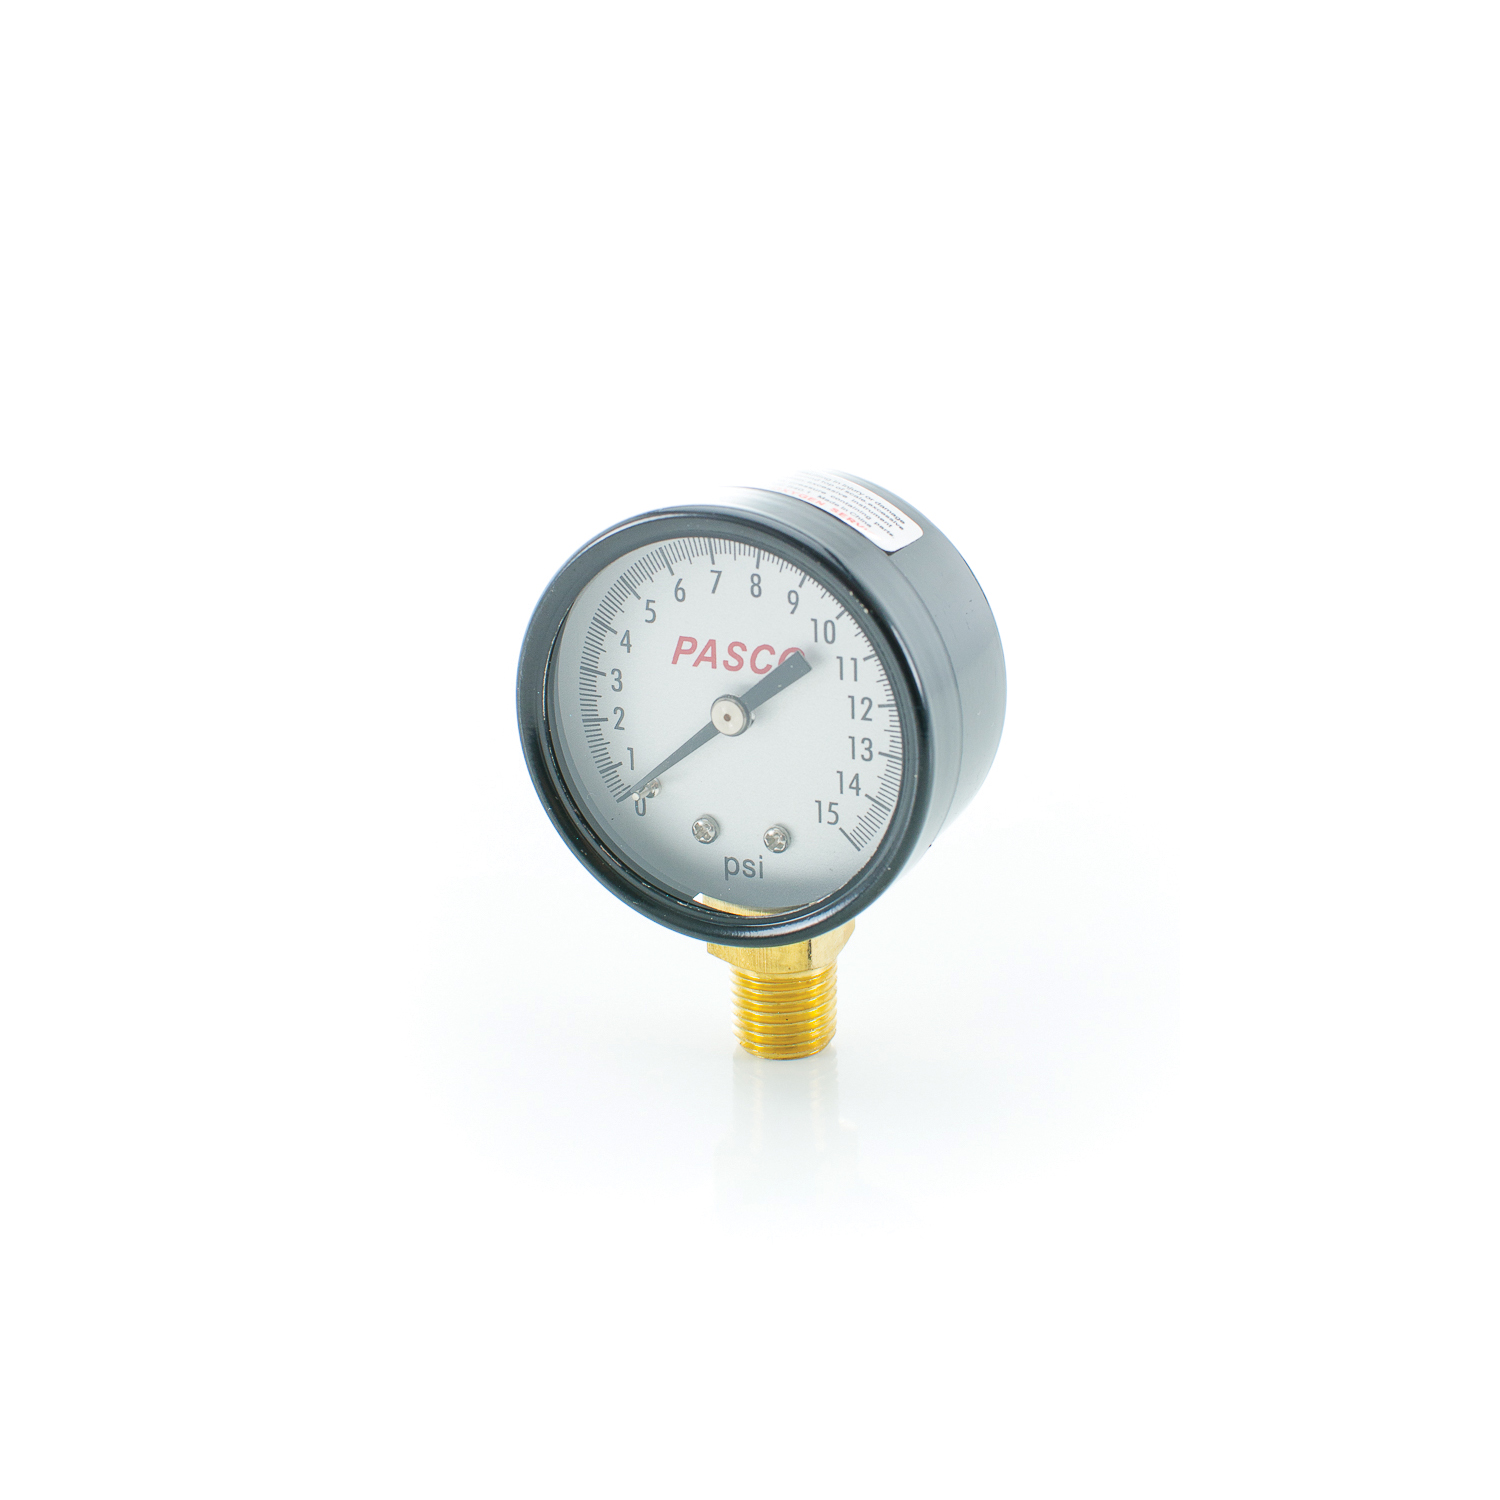 PASCO 1726-10 Pressure Gauge, 15 psi, 1/4 in MNPT Connection, 2 in Dial